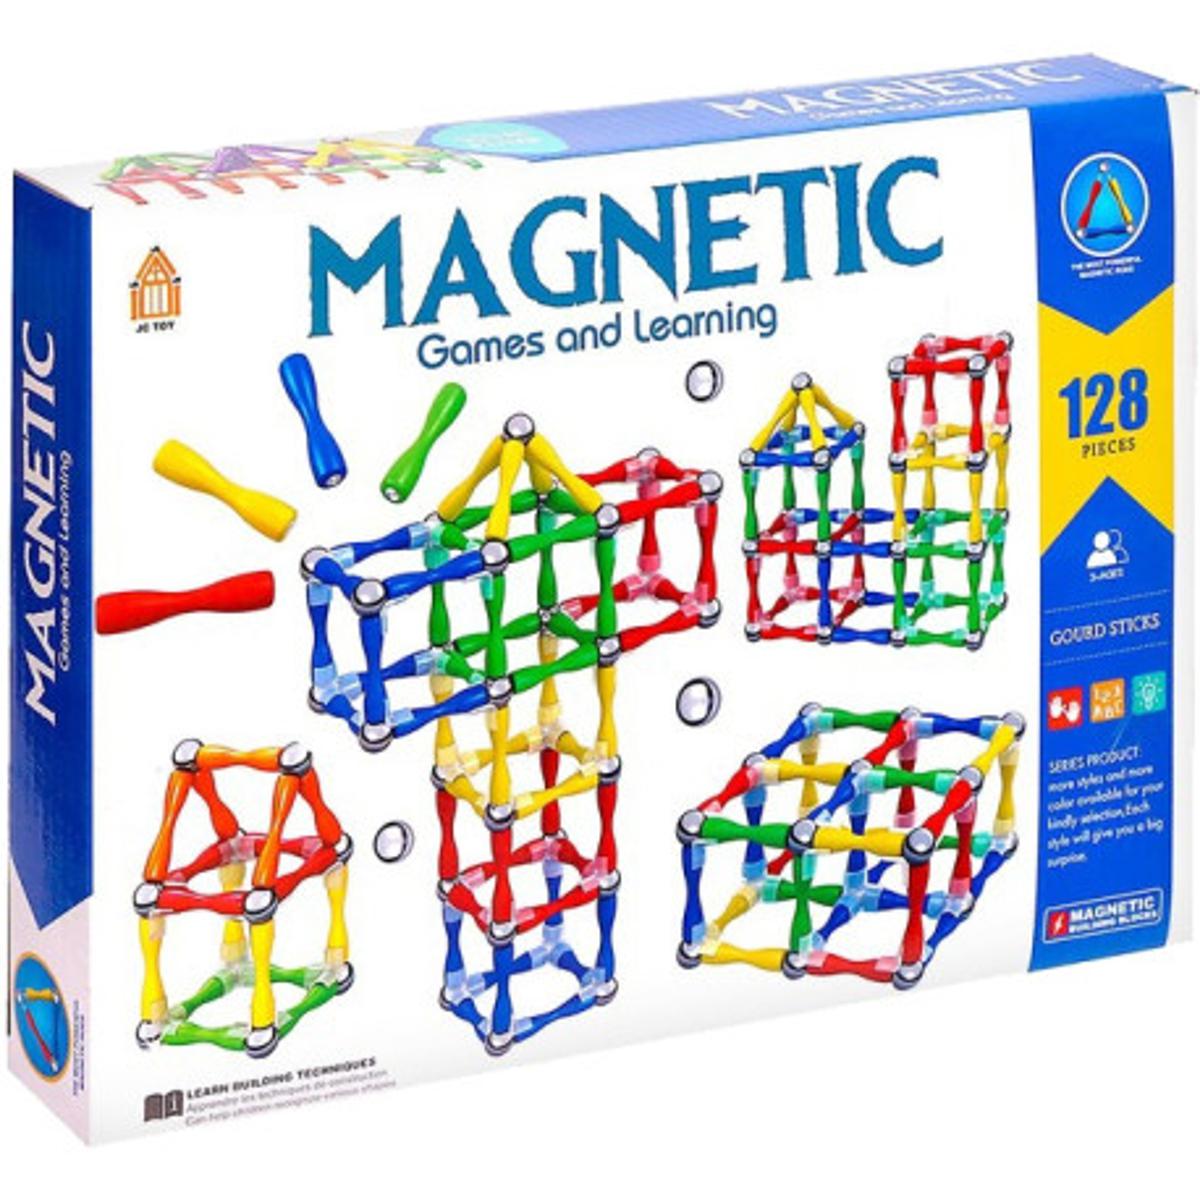 Magnet Stick and Balls construction Magnetic Bars Metal Balls Satisfaction Extreme Pressure Relief Magnetic Games 128 pcs